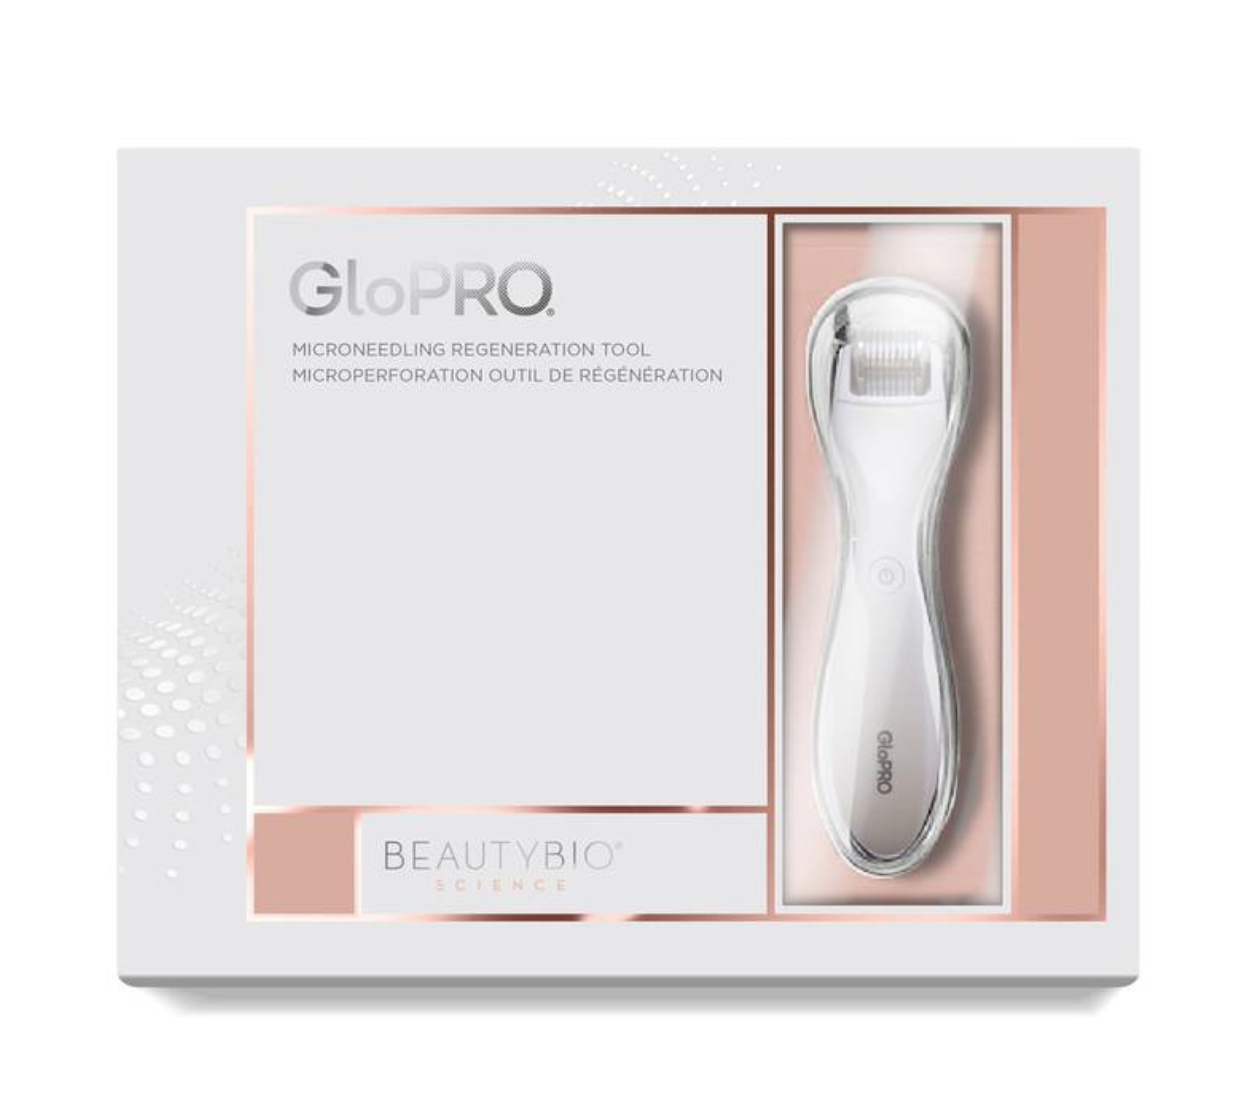 BEAUTYBIO GloPRO Facial Be super welcome Microneedling Tool Bundle Rolle with Credence Eye